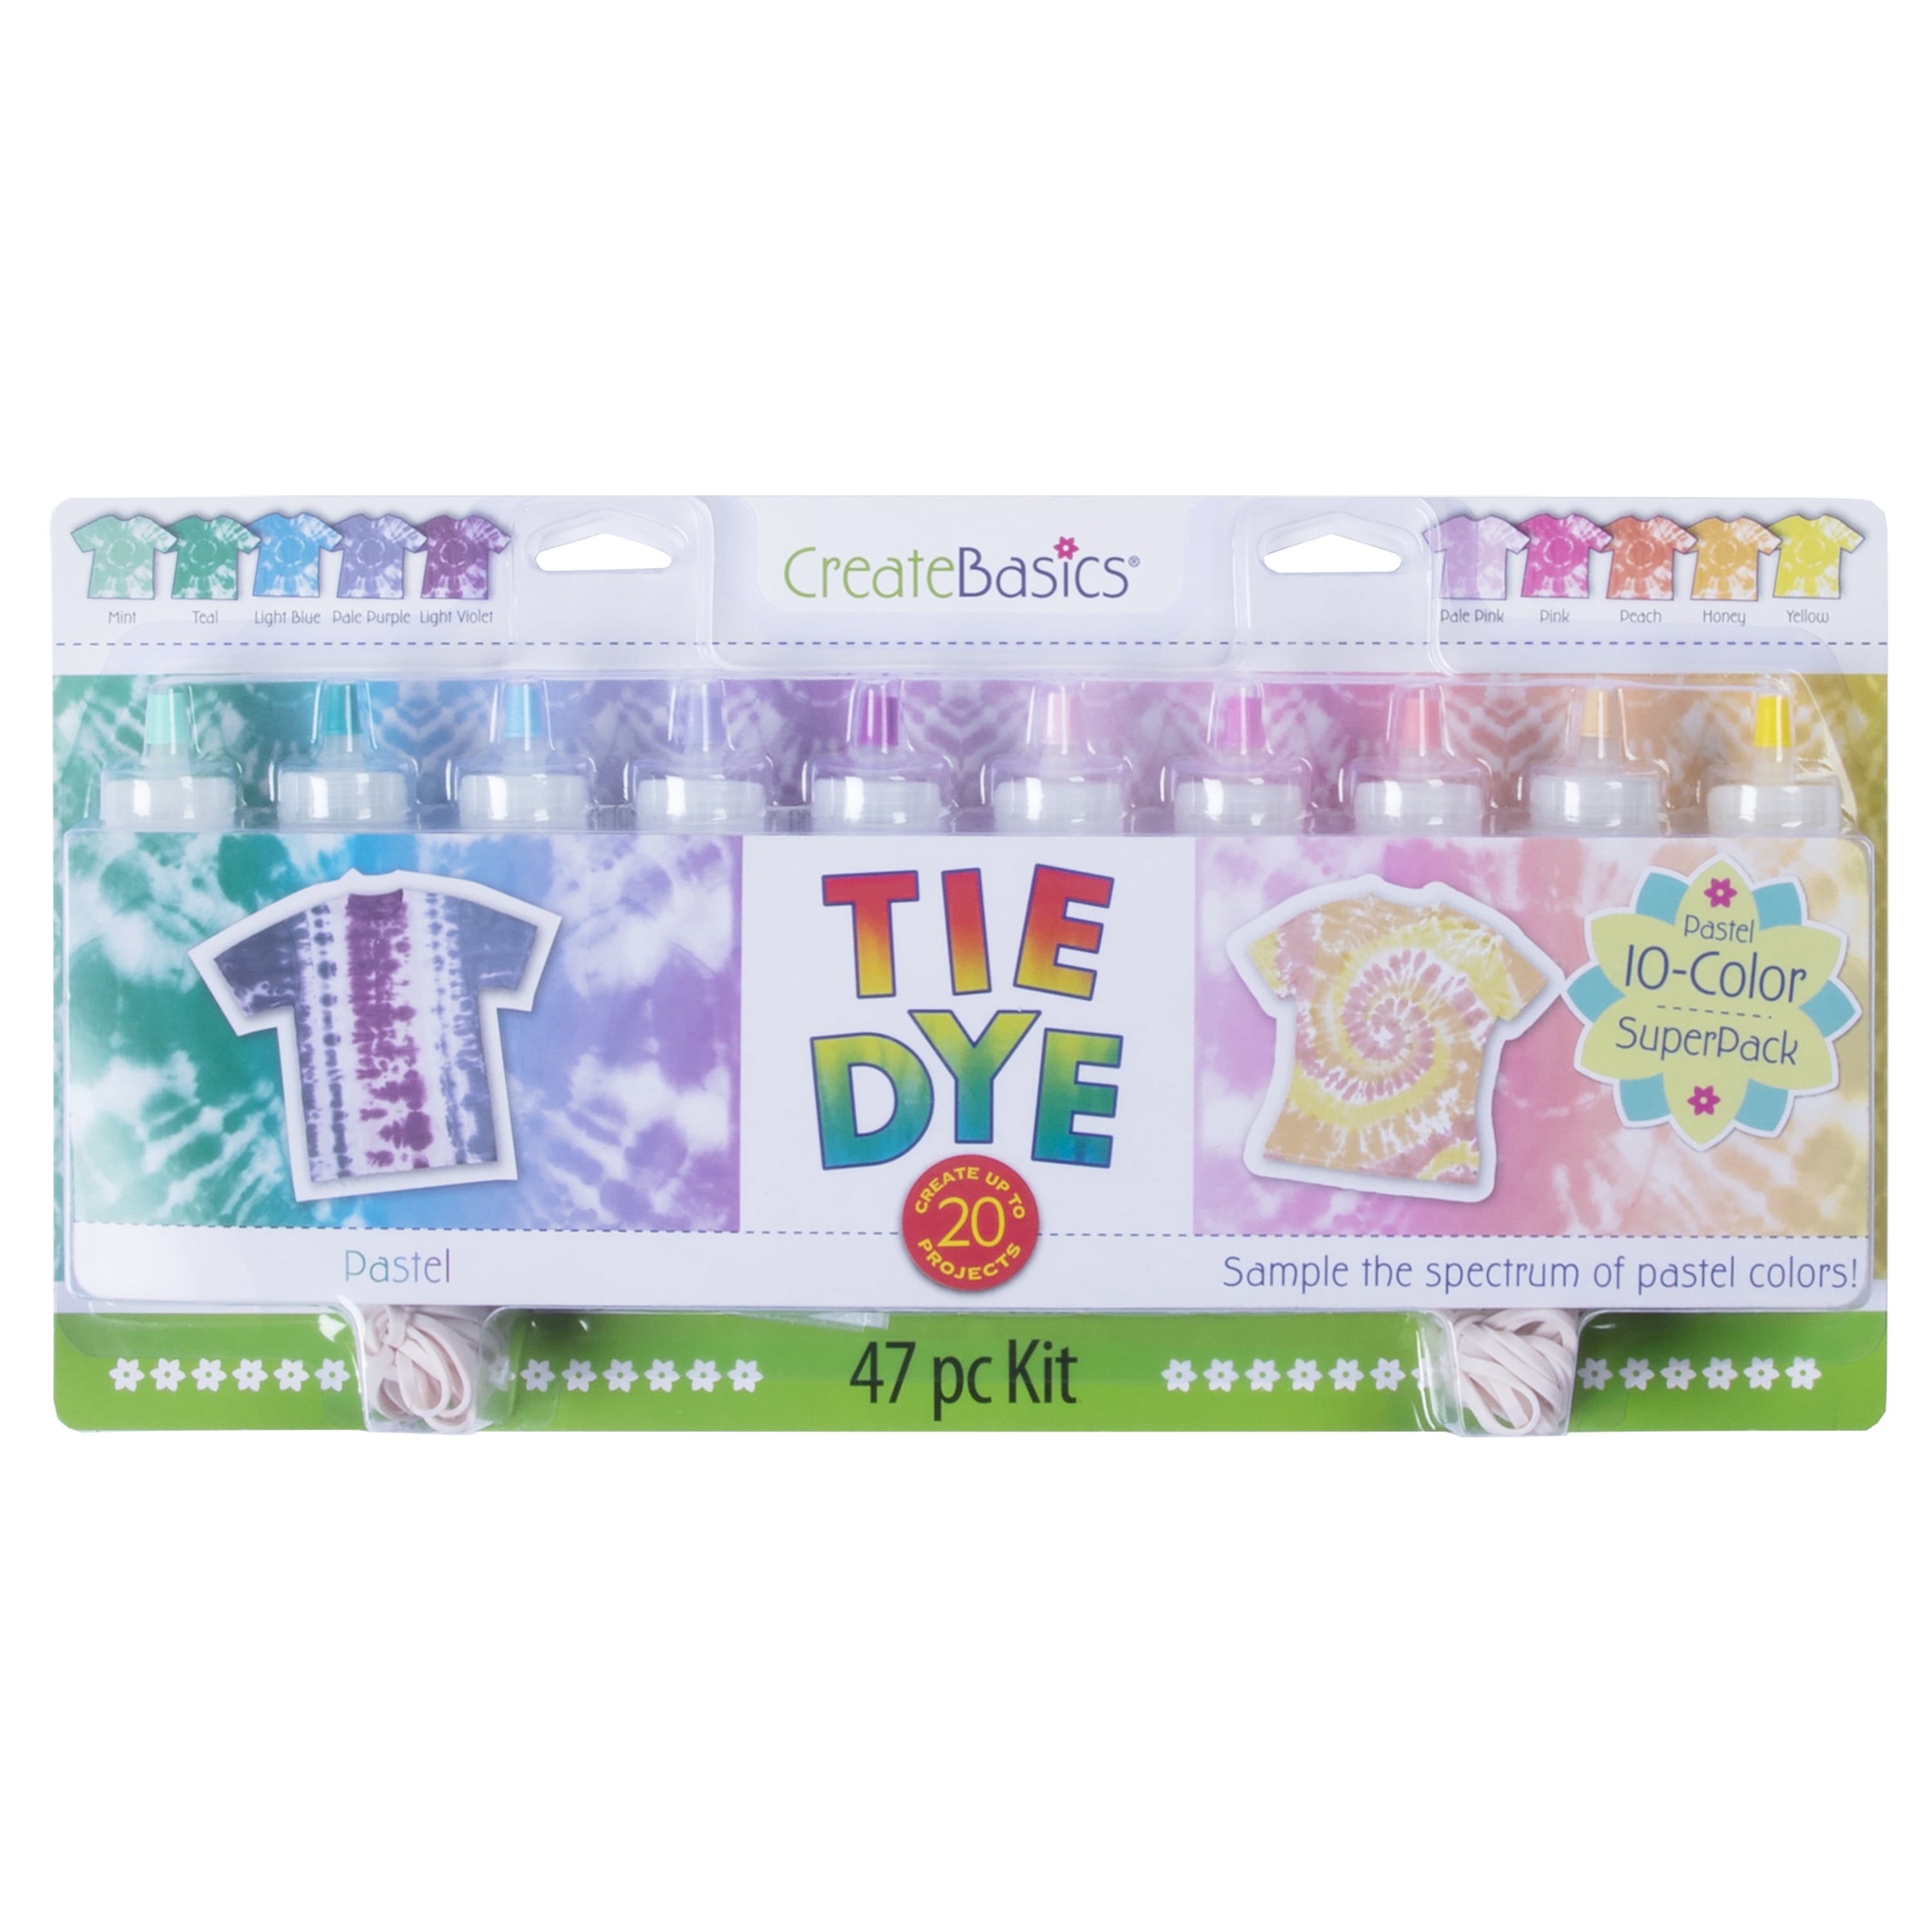 CREATE BASICS Tie Dye KIT 93 PIECES 12 COLOR PARTY KIT - MISSING SOME  CONTENTS